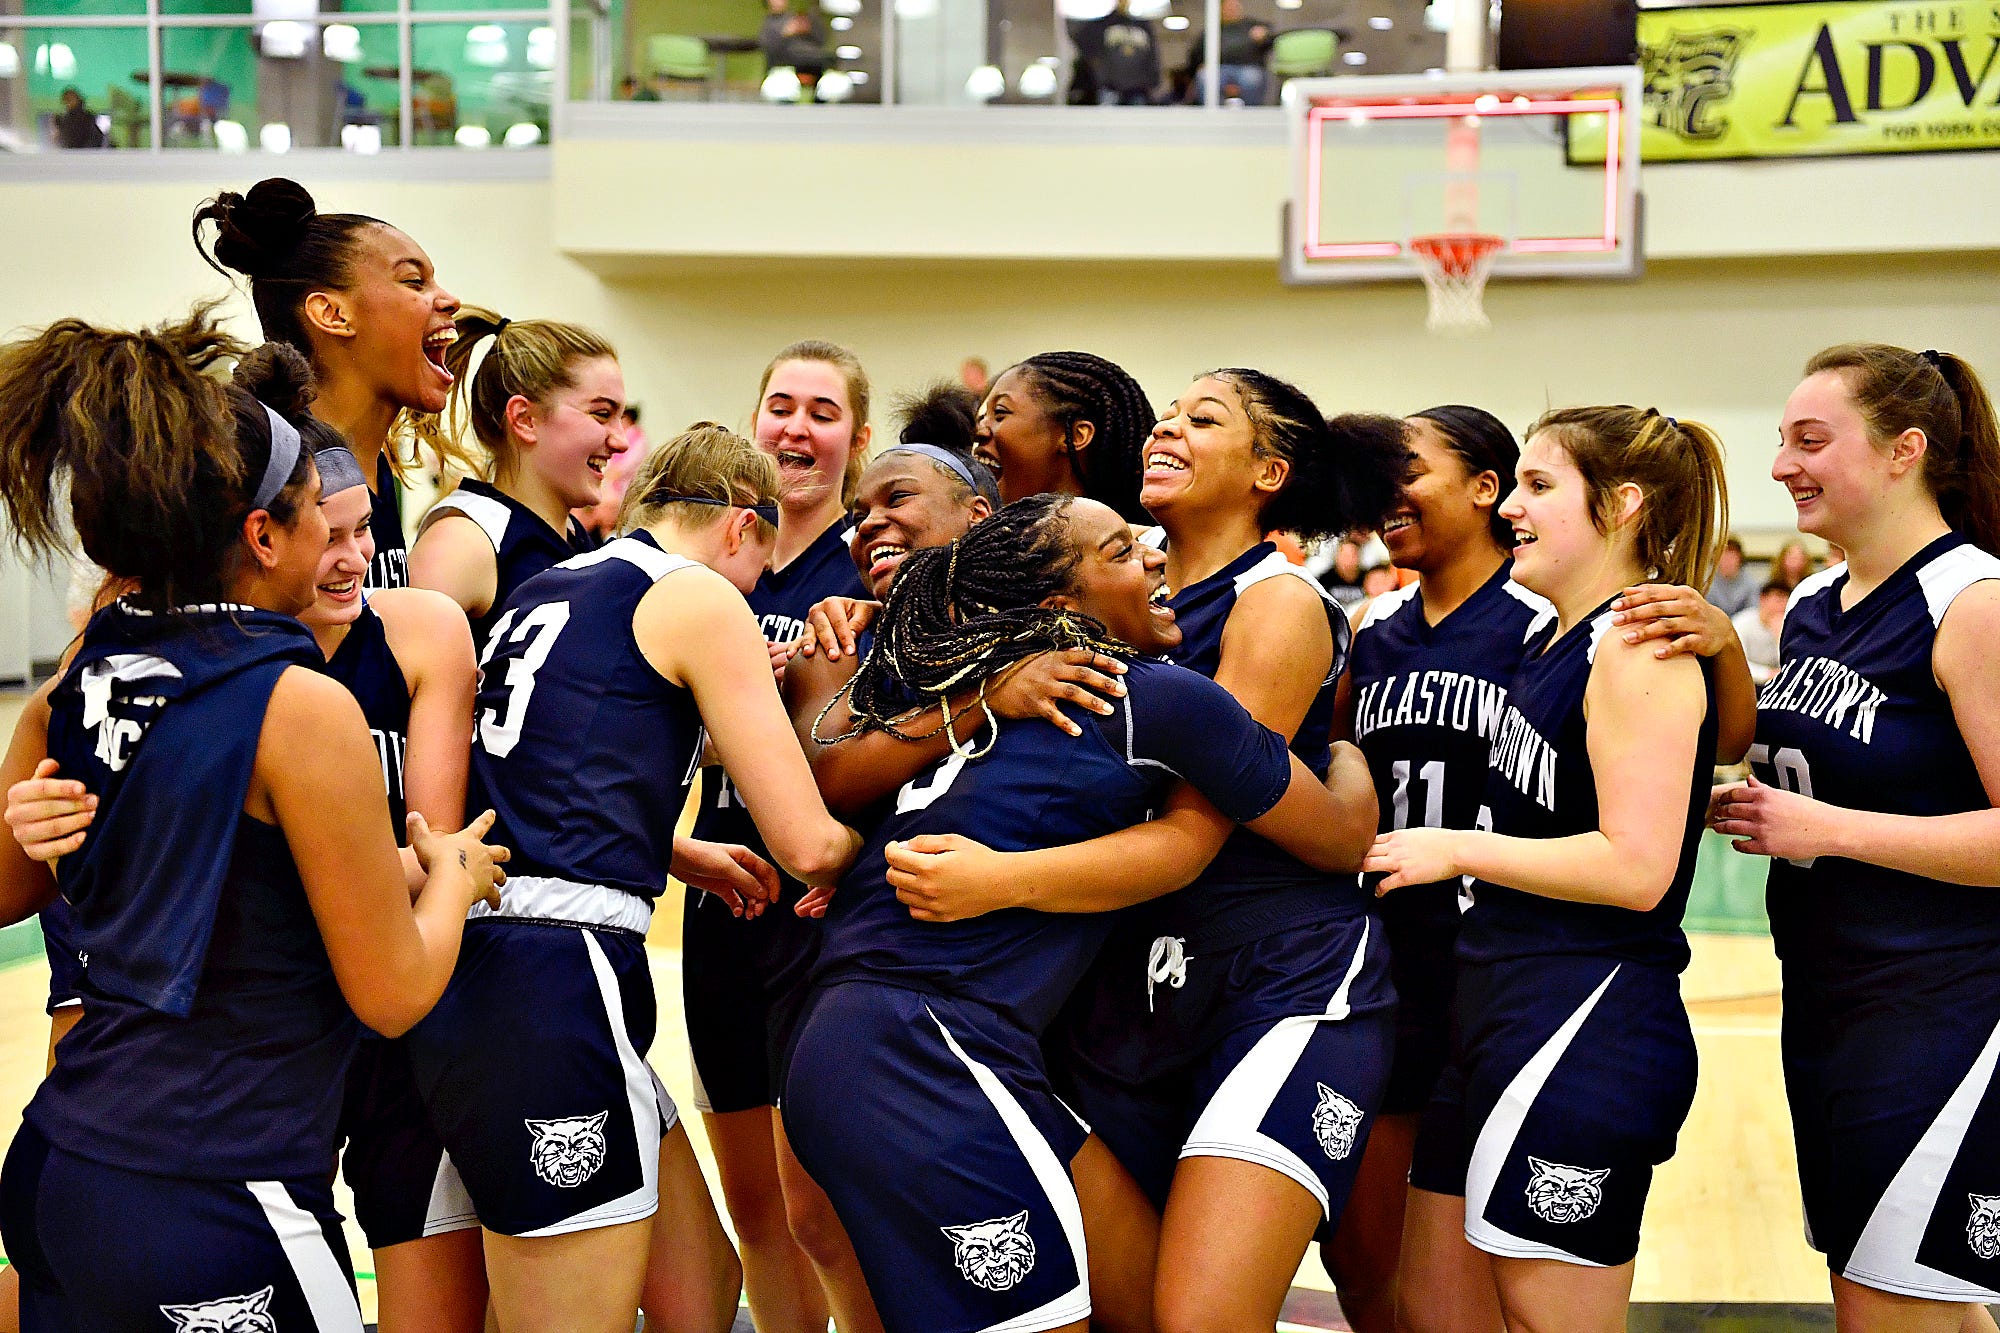 Dallastown celebrates a 42-38 win over Gettysburg during YAIAA girls' basketball championship action at Grumbacher Sport and Fitness Center at York College of Pennsylvania in Spring Garden Township, Friday, Feb. 14, 2020. Dawn J. Sagert photo